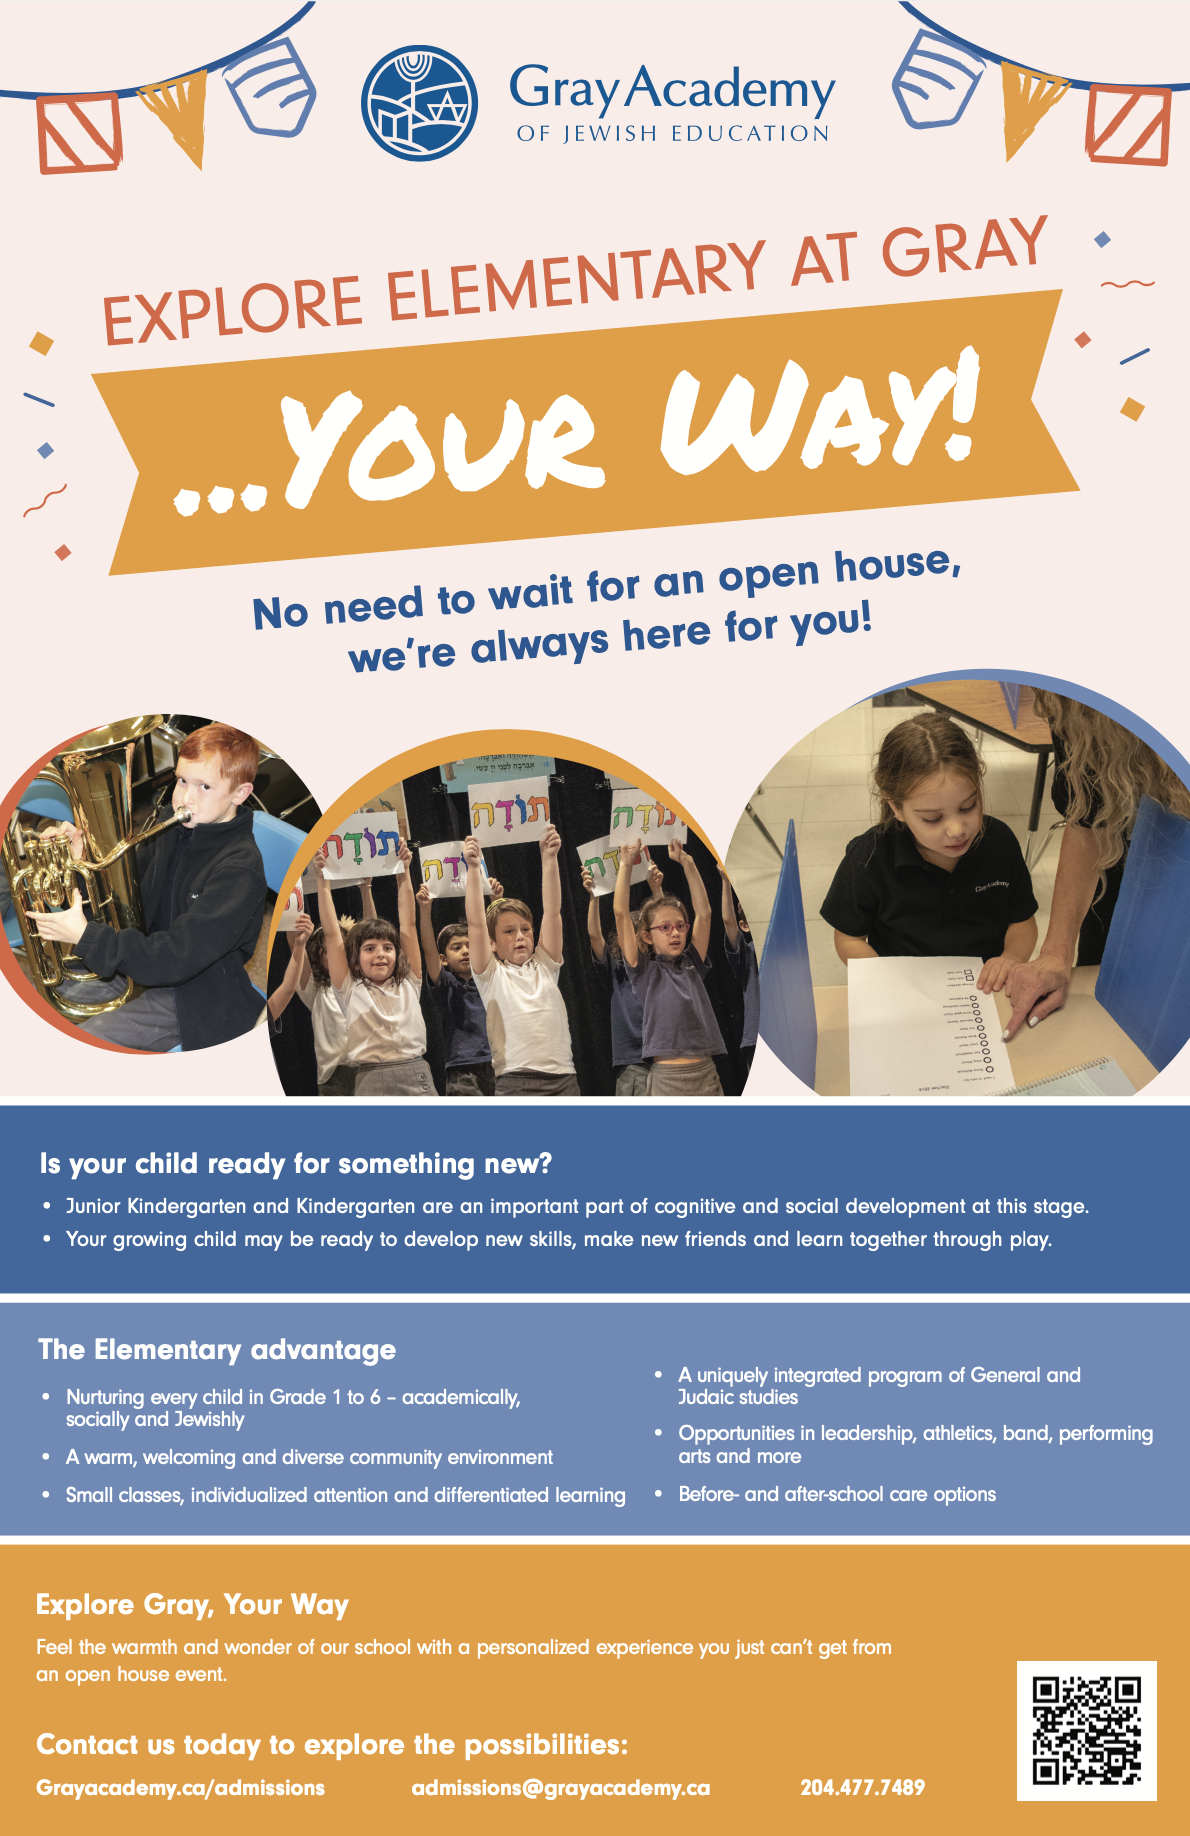 Elementary Recruitment Poster - "Explore Elementary at Gray ...Your Way!"